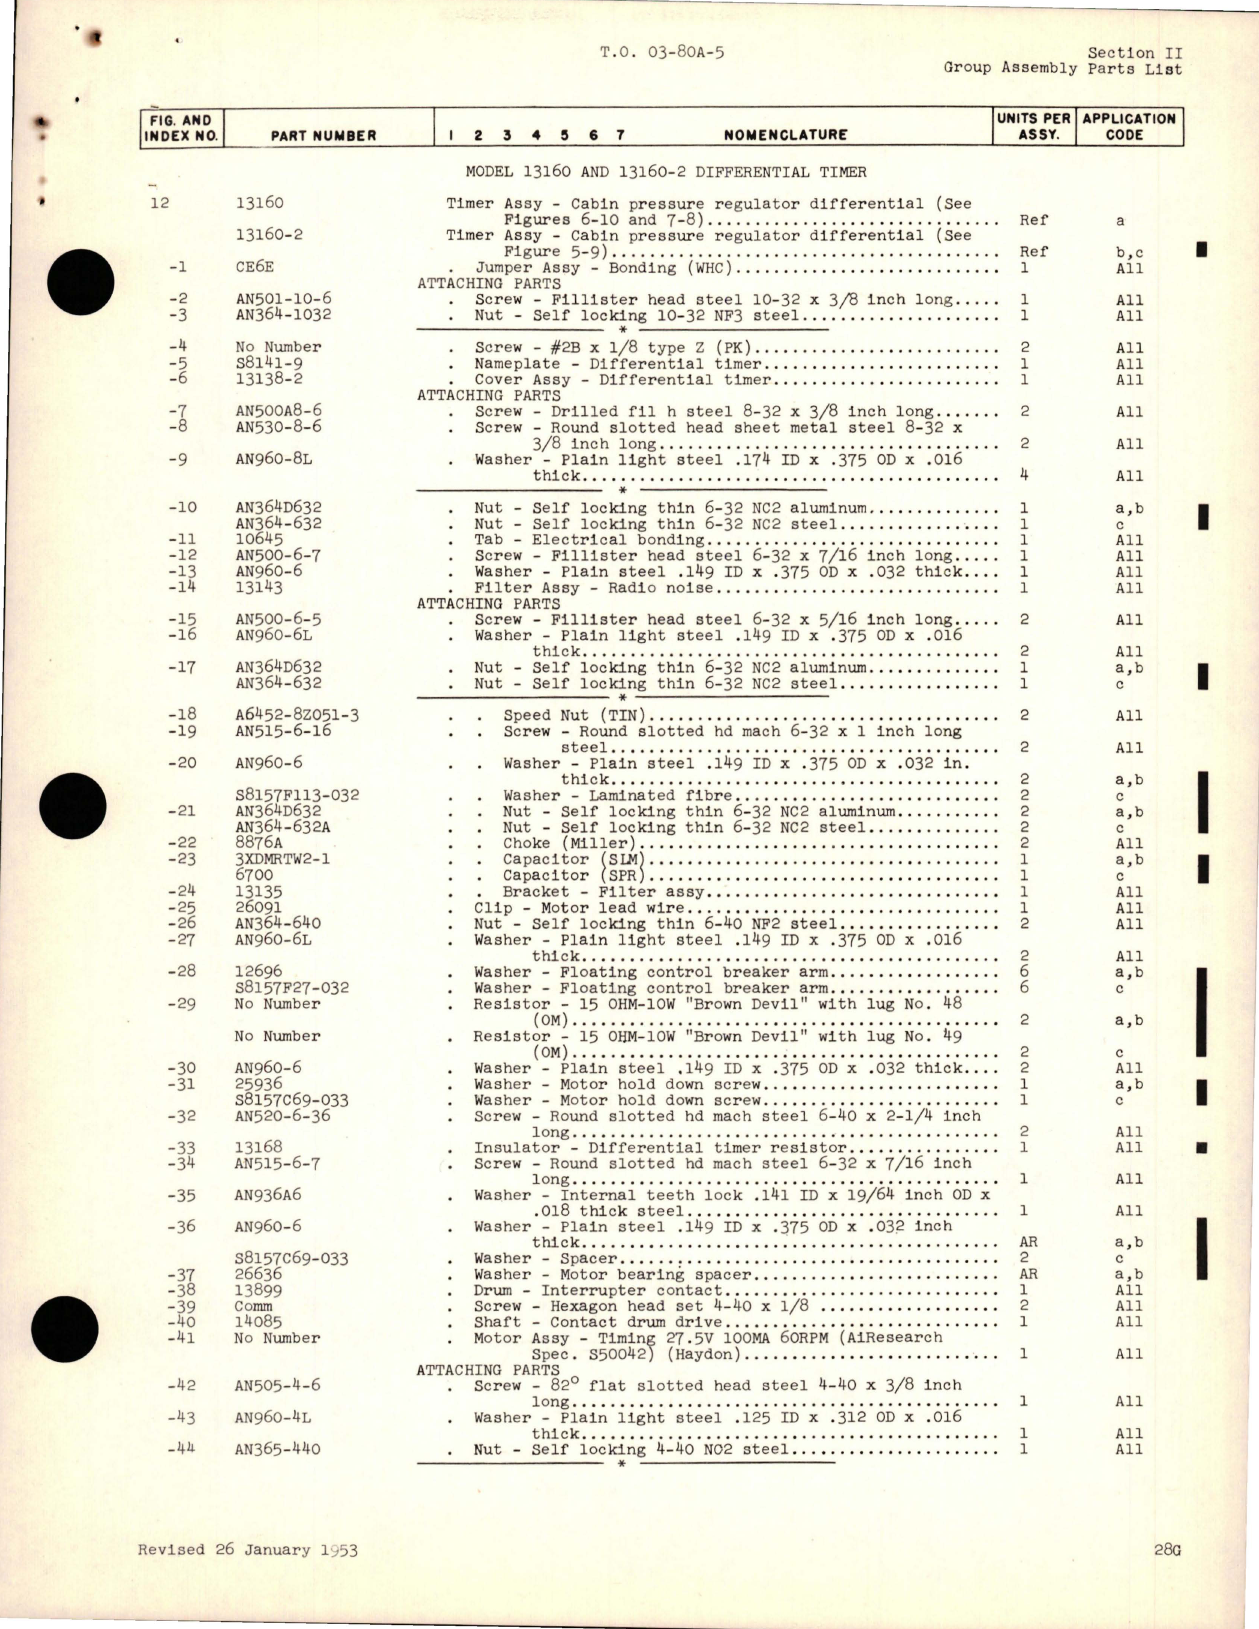 Sample page 7 from AirCorps Library document: Parts Catalog for Cabin Pressure Regulators 